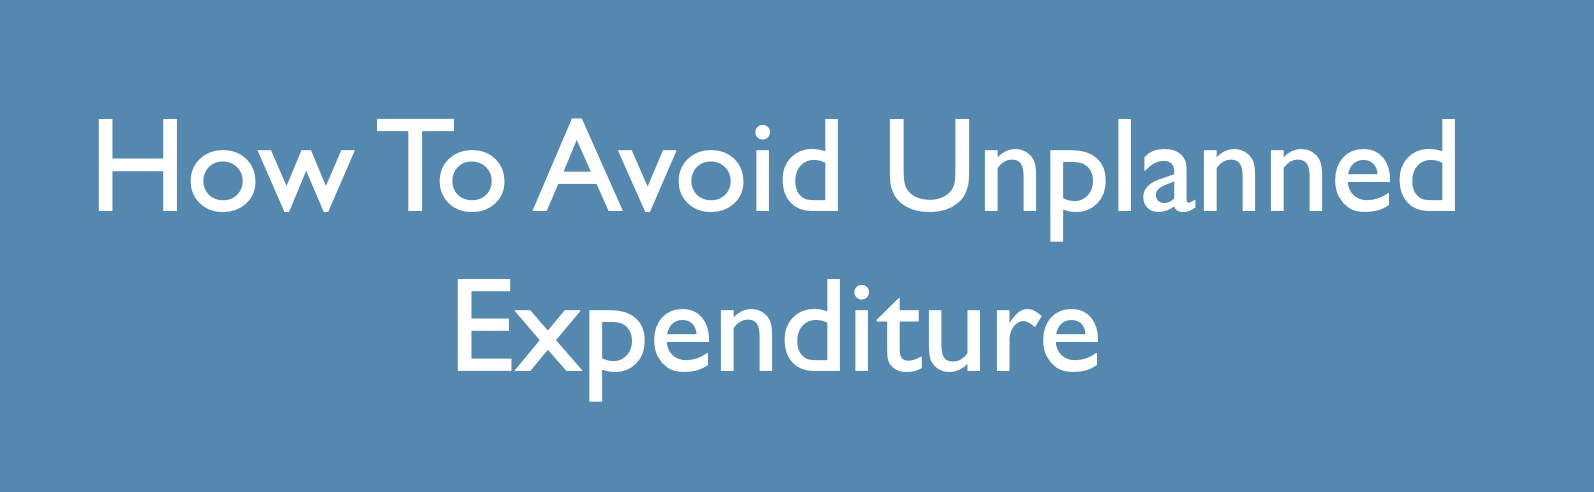 How To Avoid Unplanned Expenditure